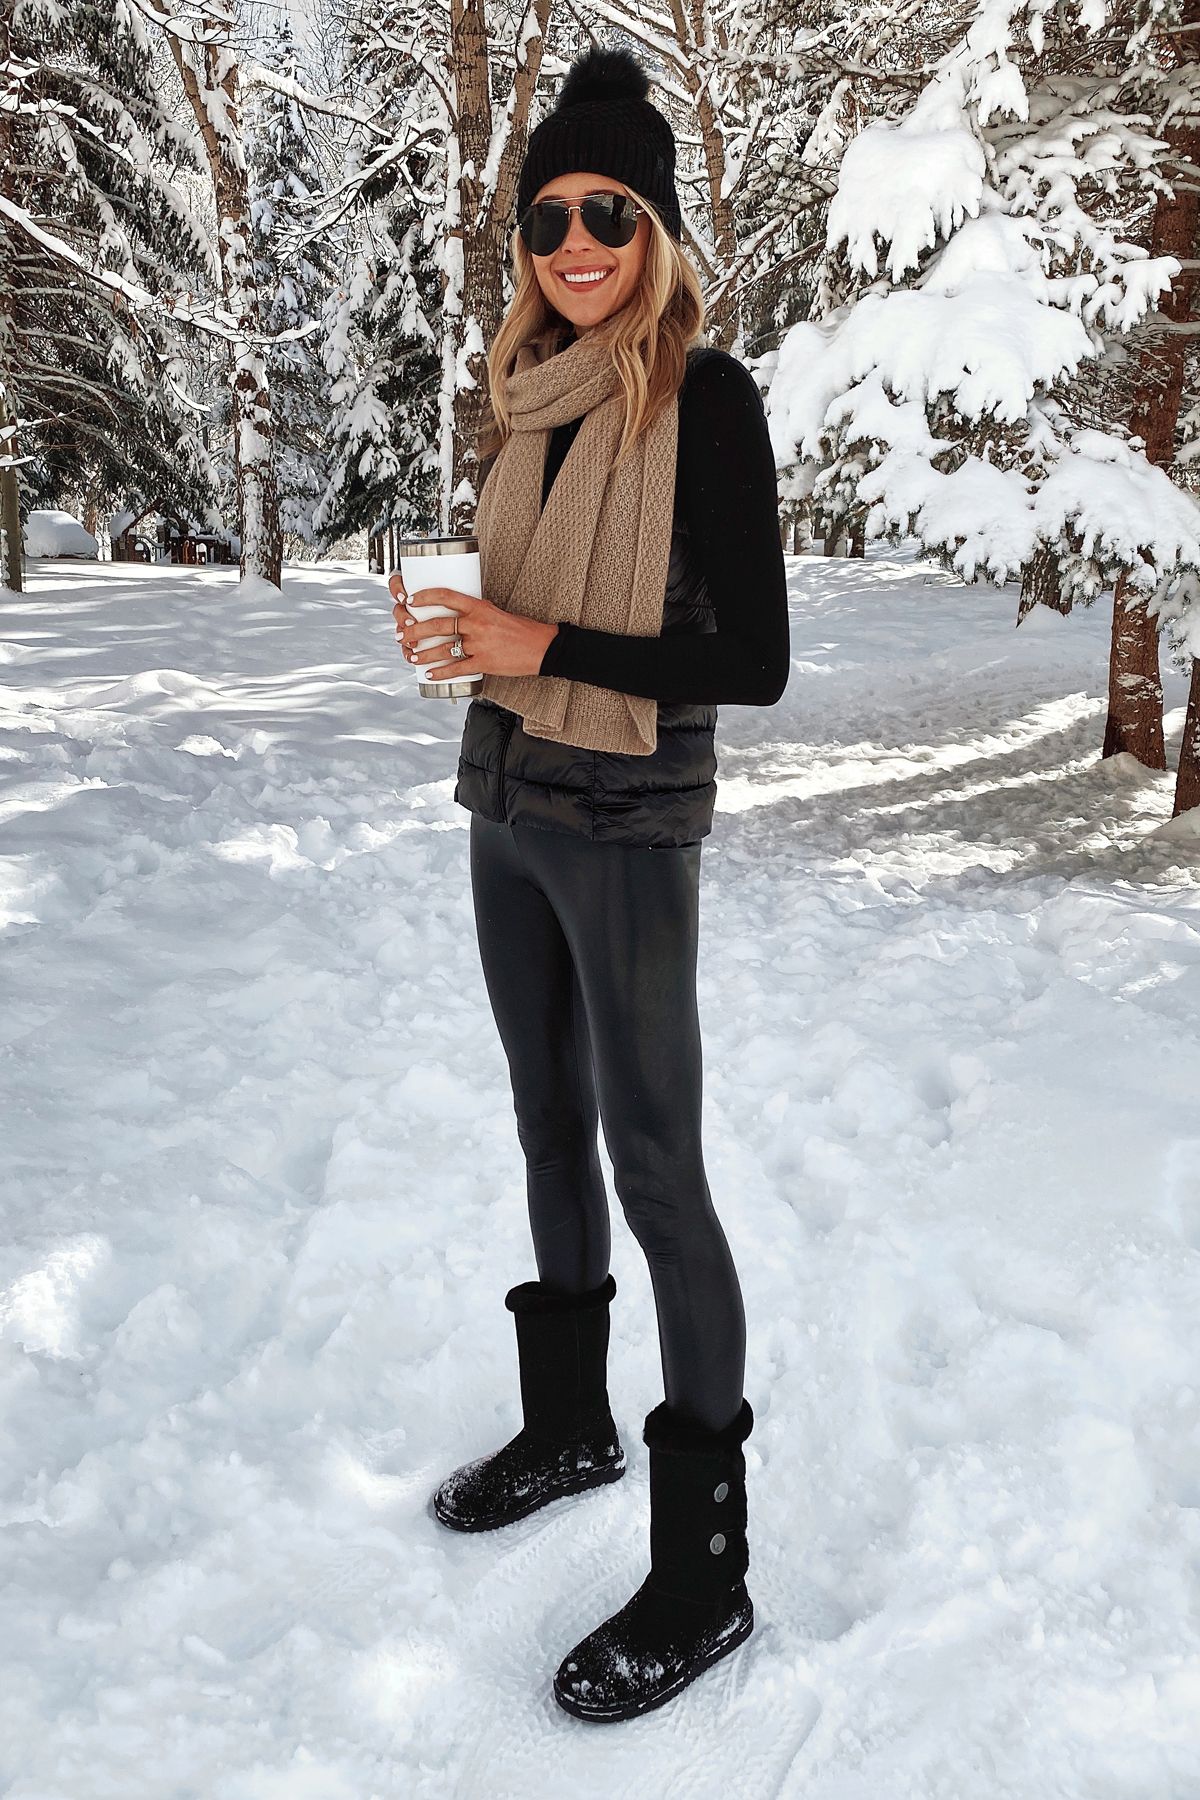 How To Stay Comfy And Amazing On Winter
Leggings